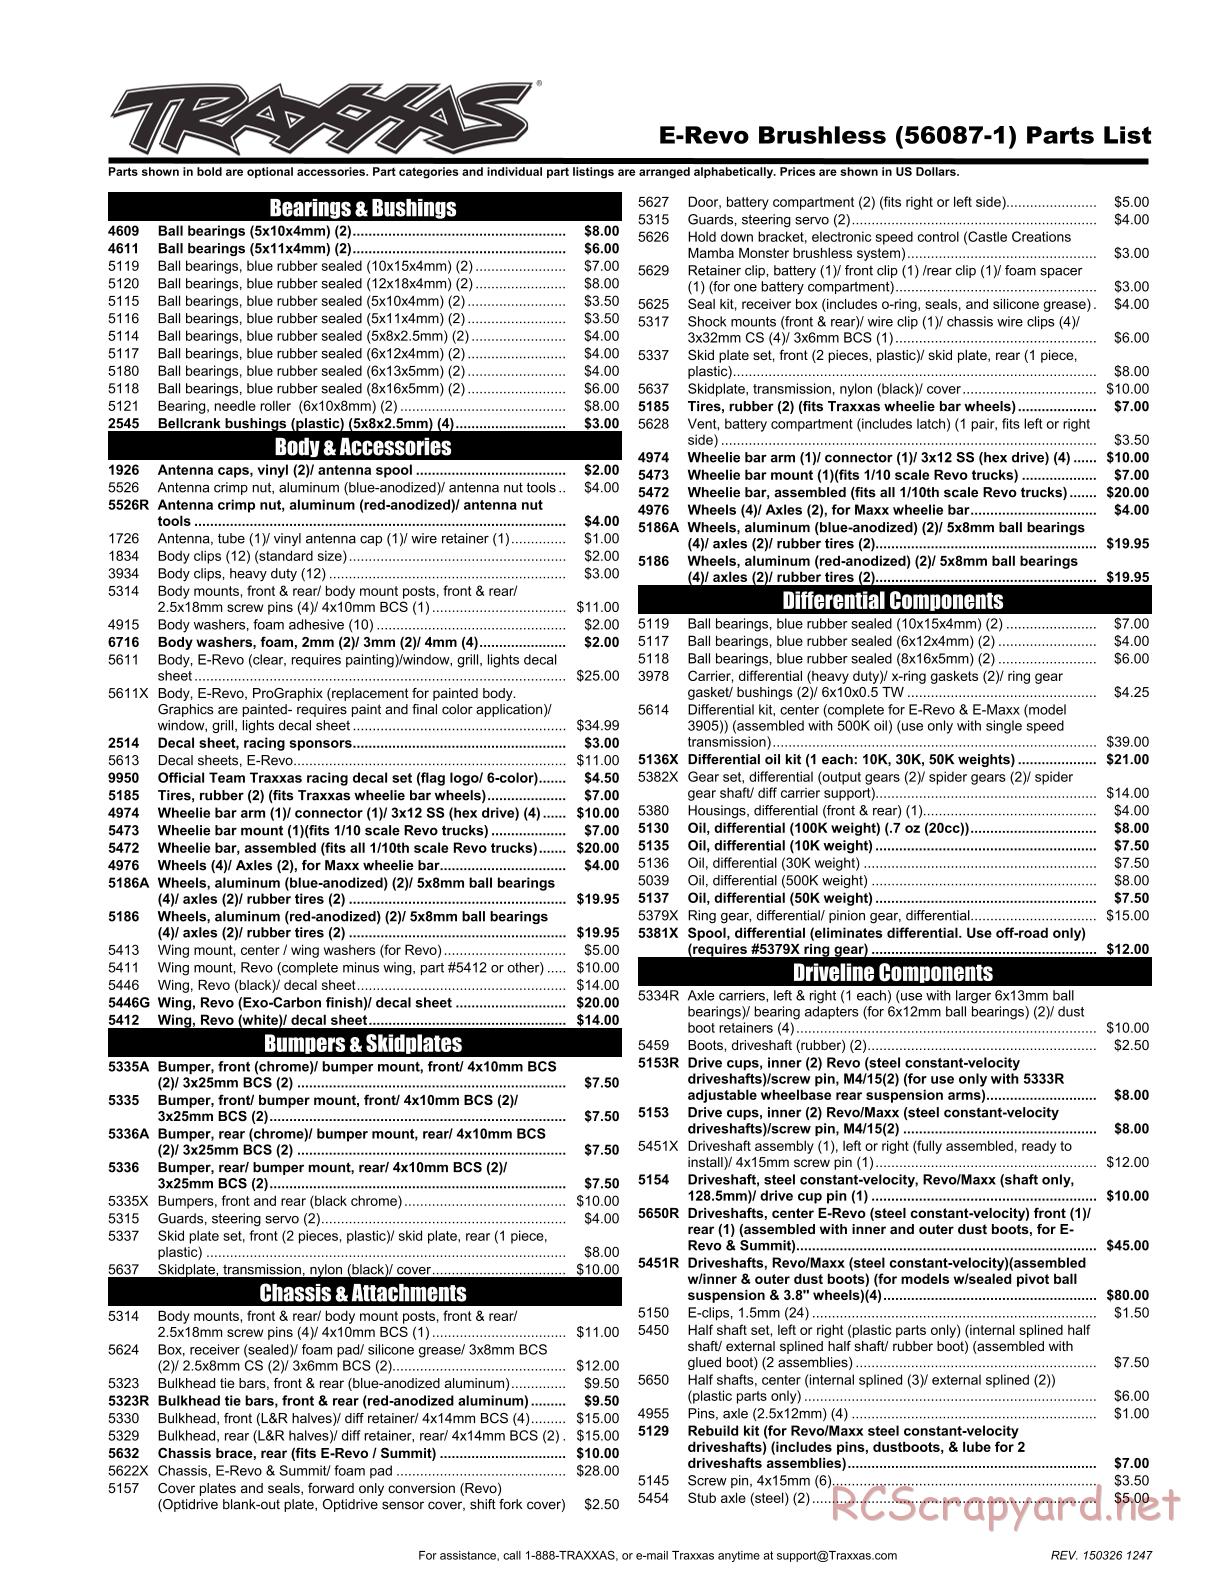 Traxxas - E-Revo Brushless (2015) - Parts List - Page 1